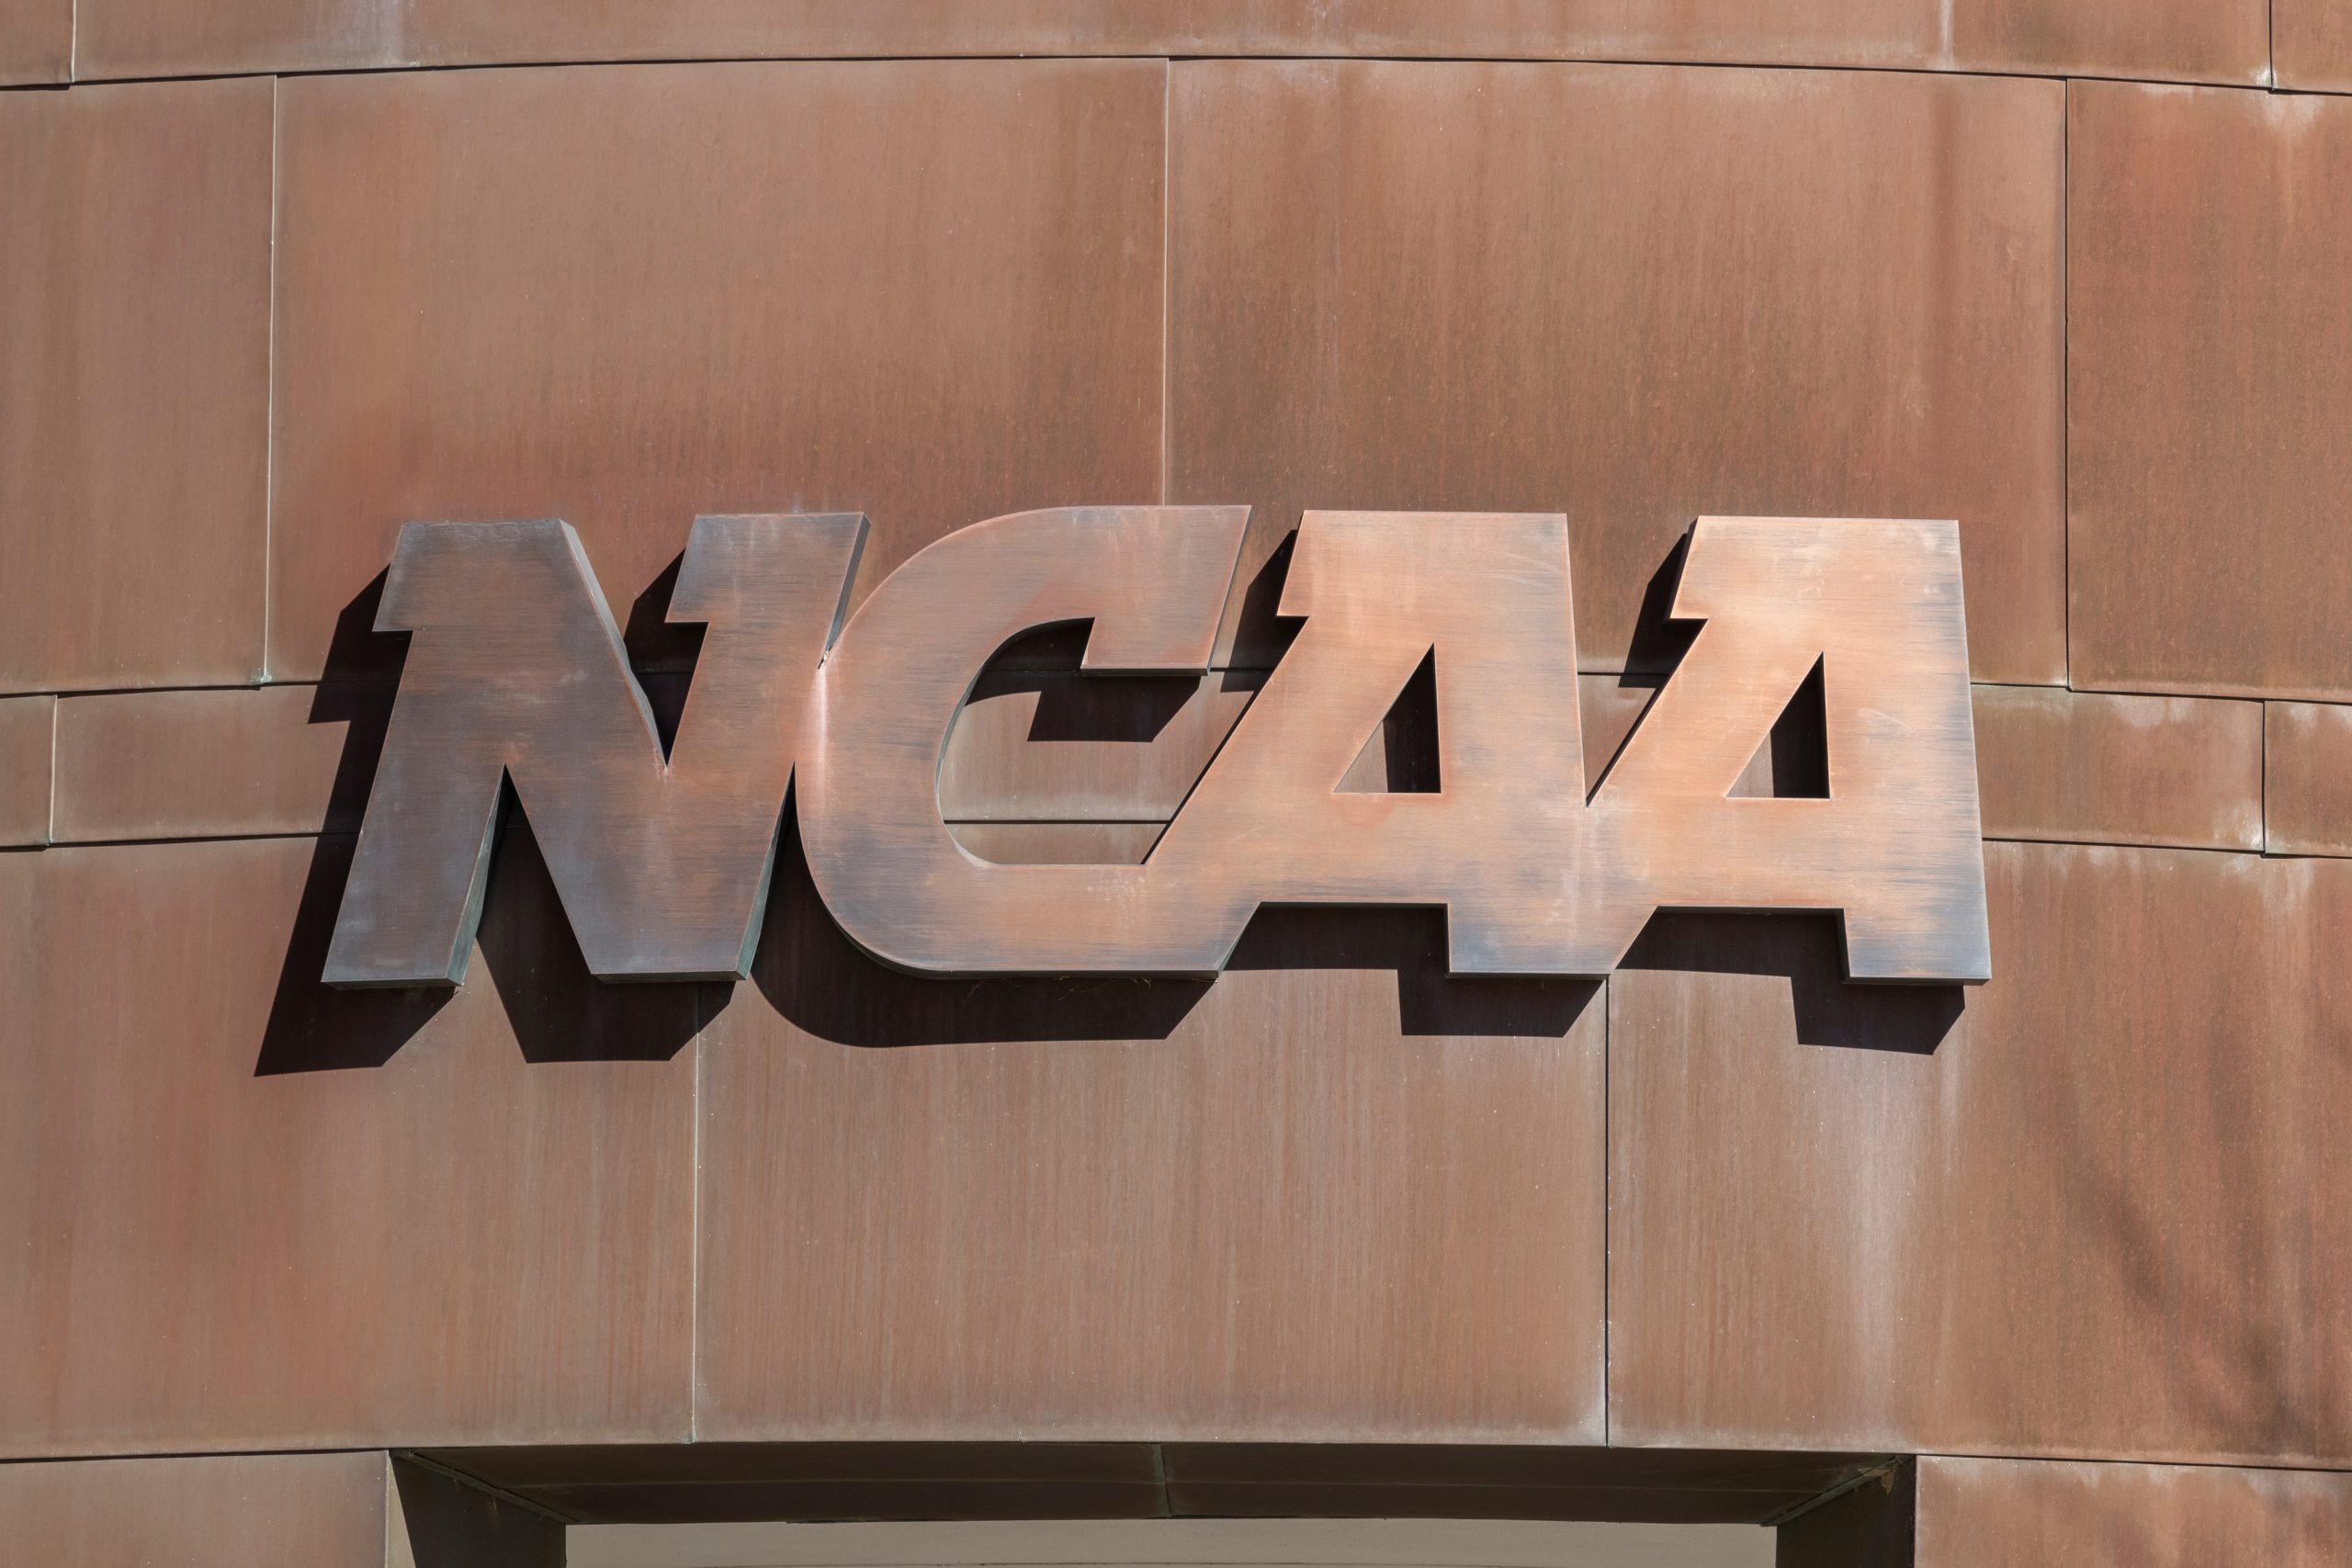 URGENT: Tell NCAA Governors to Protect Women’s Sports!